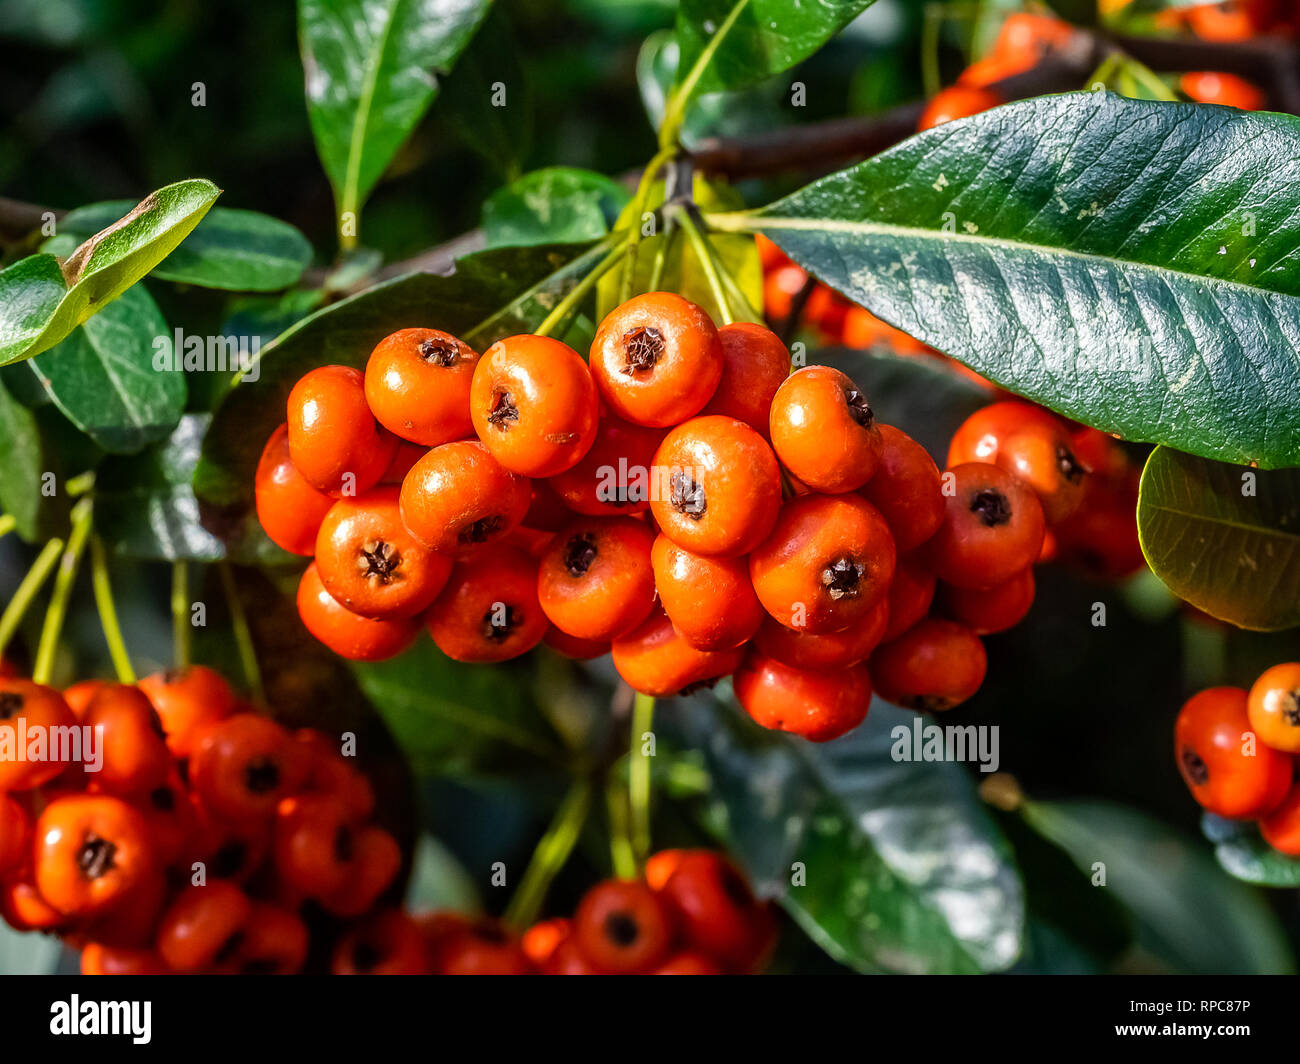 A large cluster of ripe firethorn berries hang from a bush along a residential walking path in Kanagawa, Japan Stock Photo